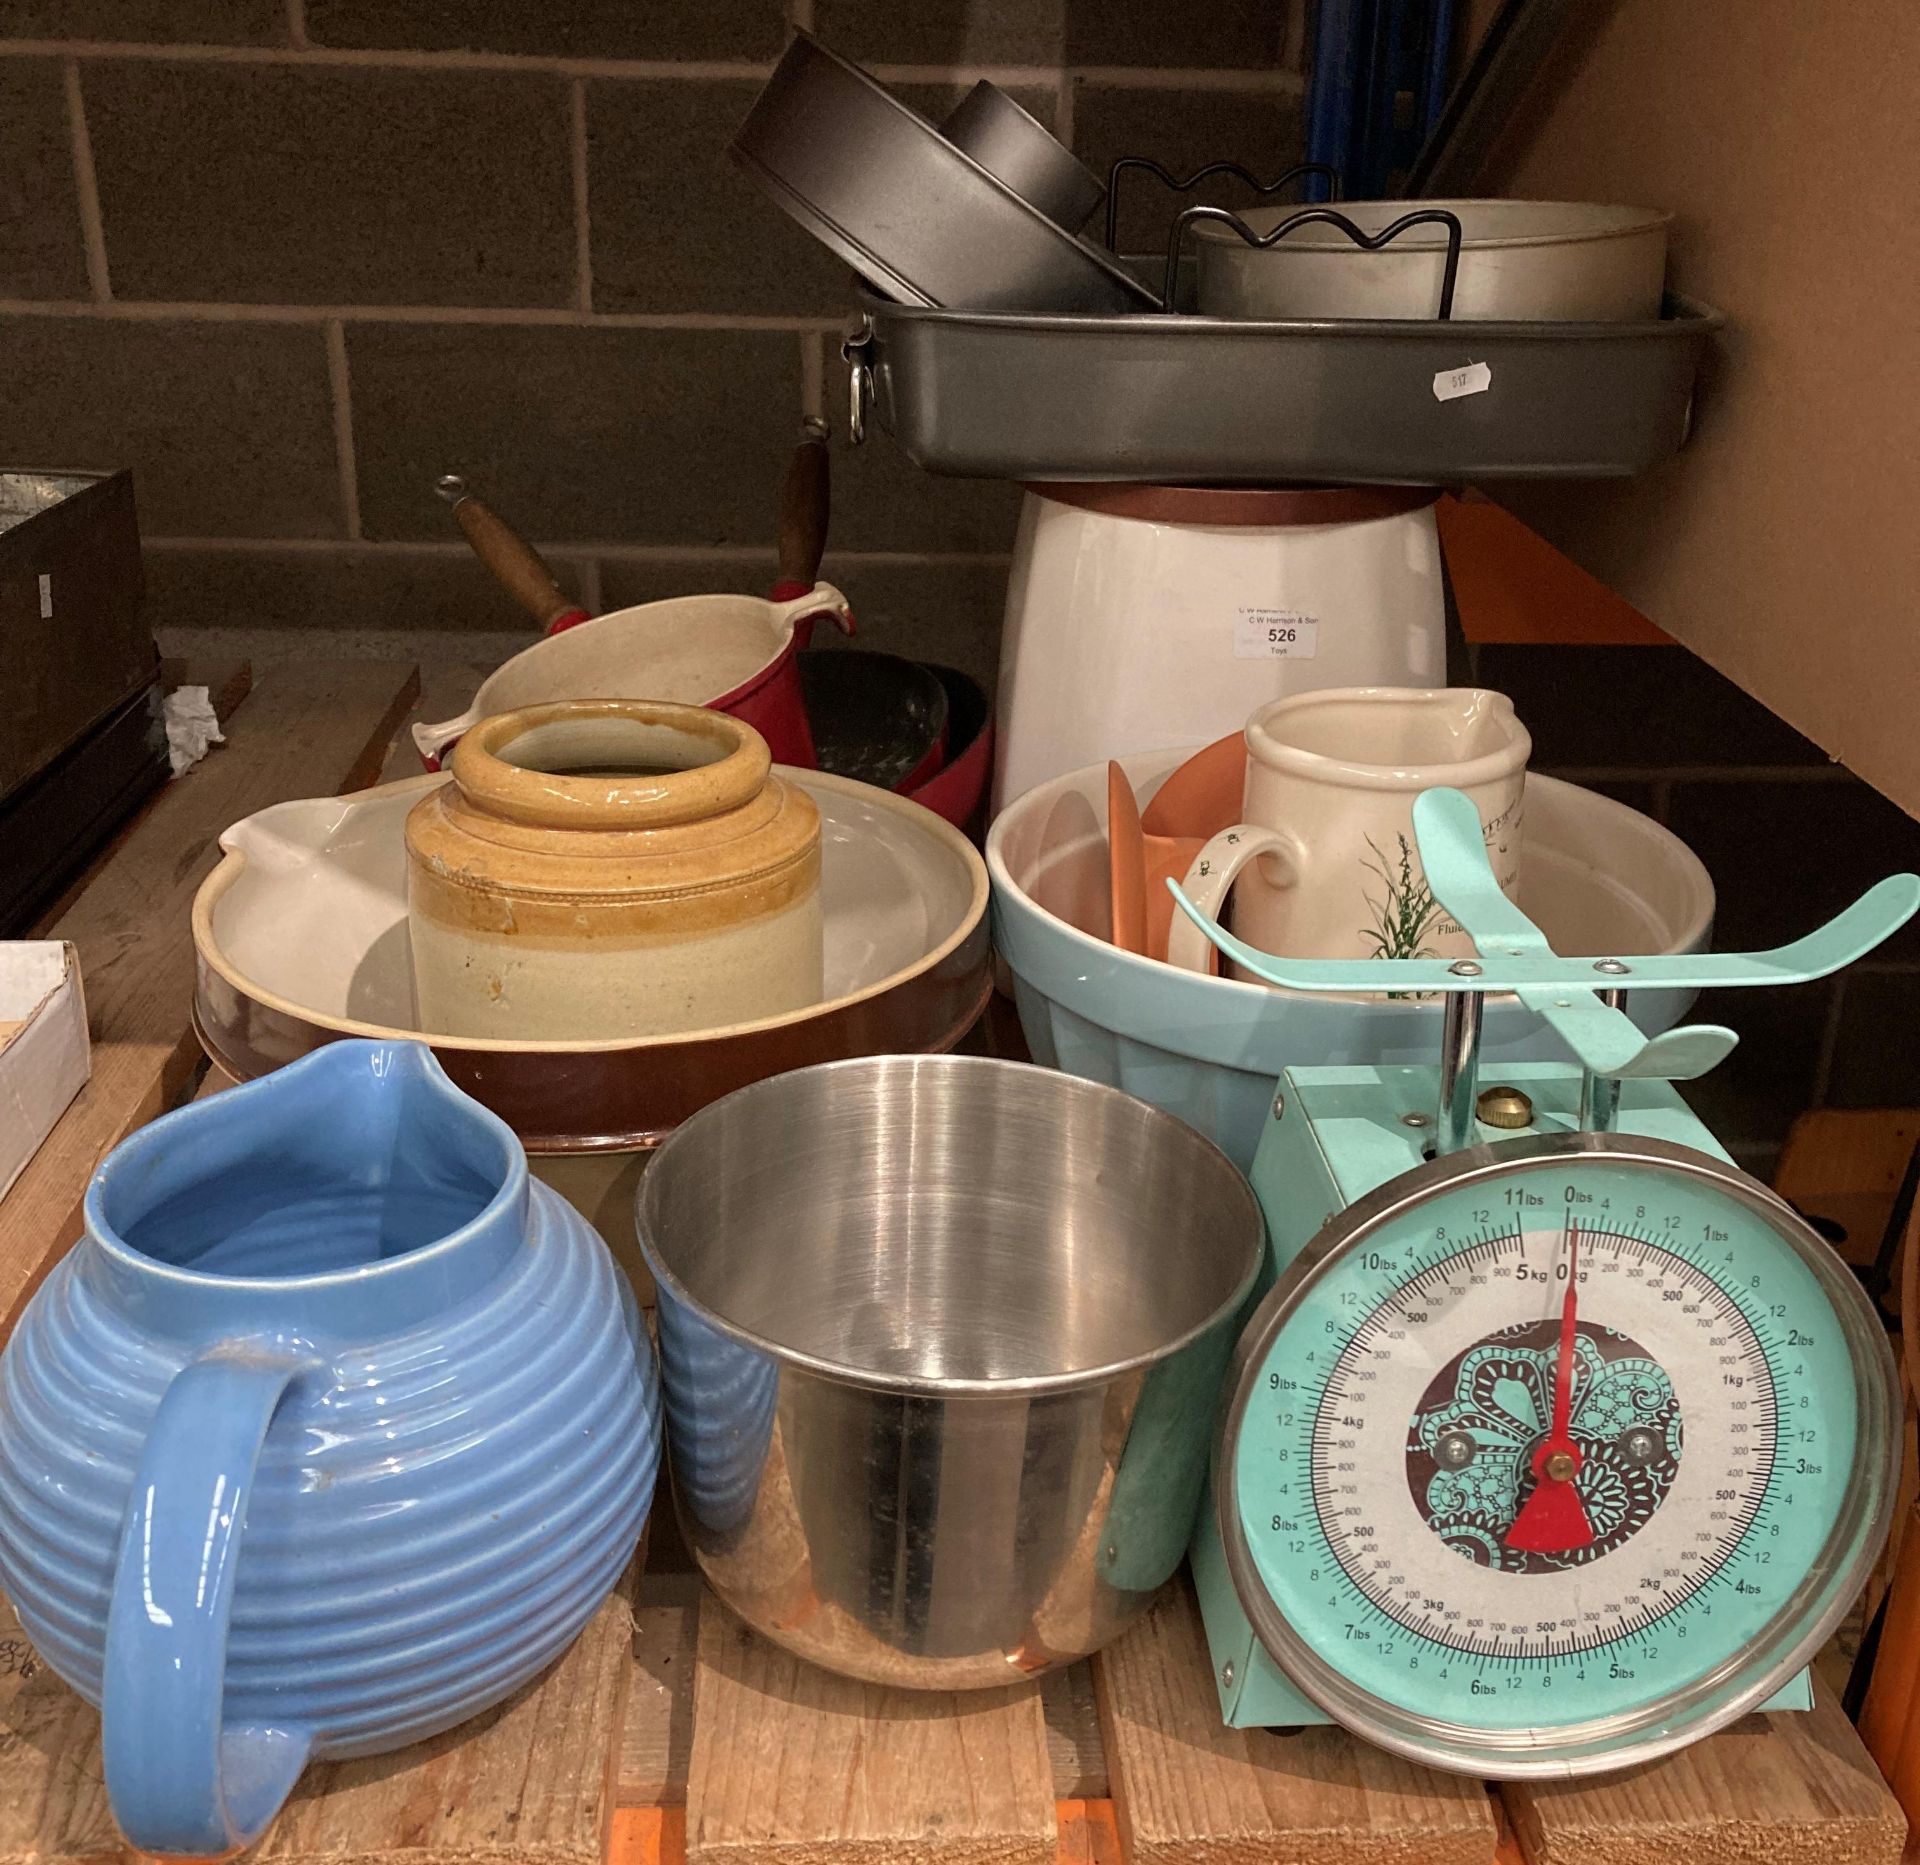 16 items kitchenware - Le Creuset 32 oval dish, Fondue dish, 2 cast iron frying pans, bread bin, - Image 3 of 3